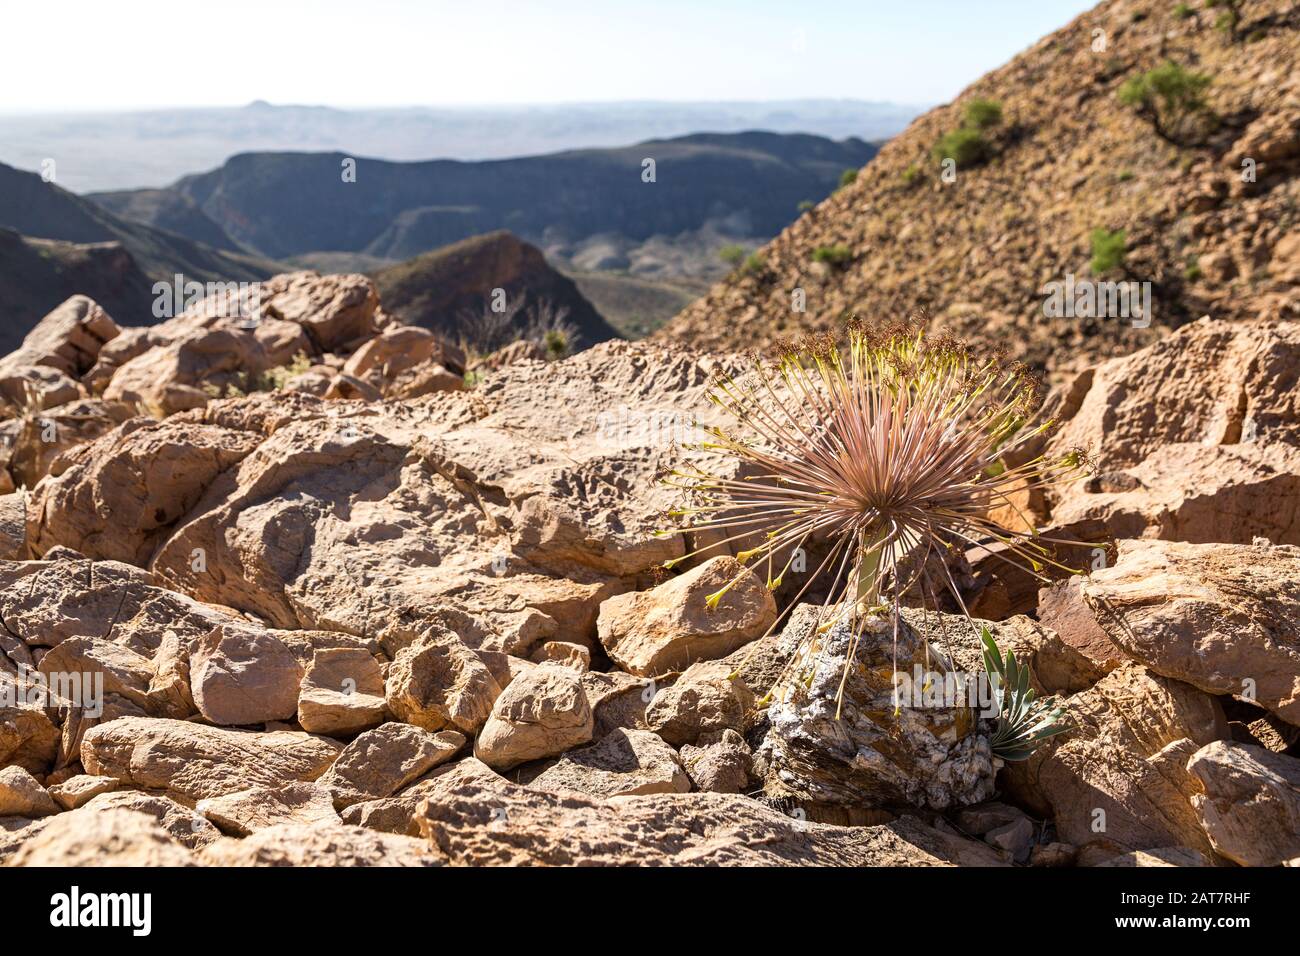 Funny plant growing in the desert of Namib Naukluft Park (focus on the plant), Namibia Stock Photo